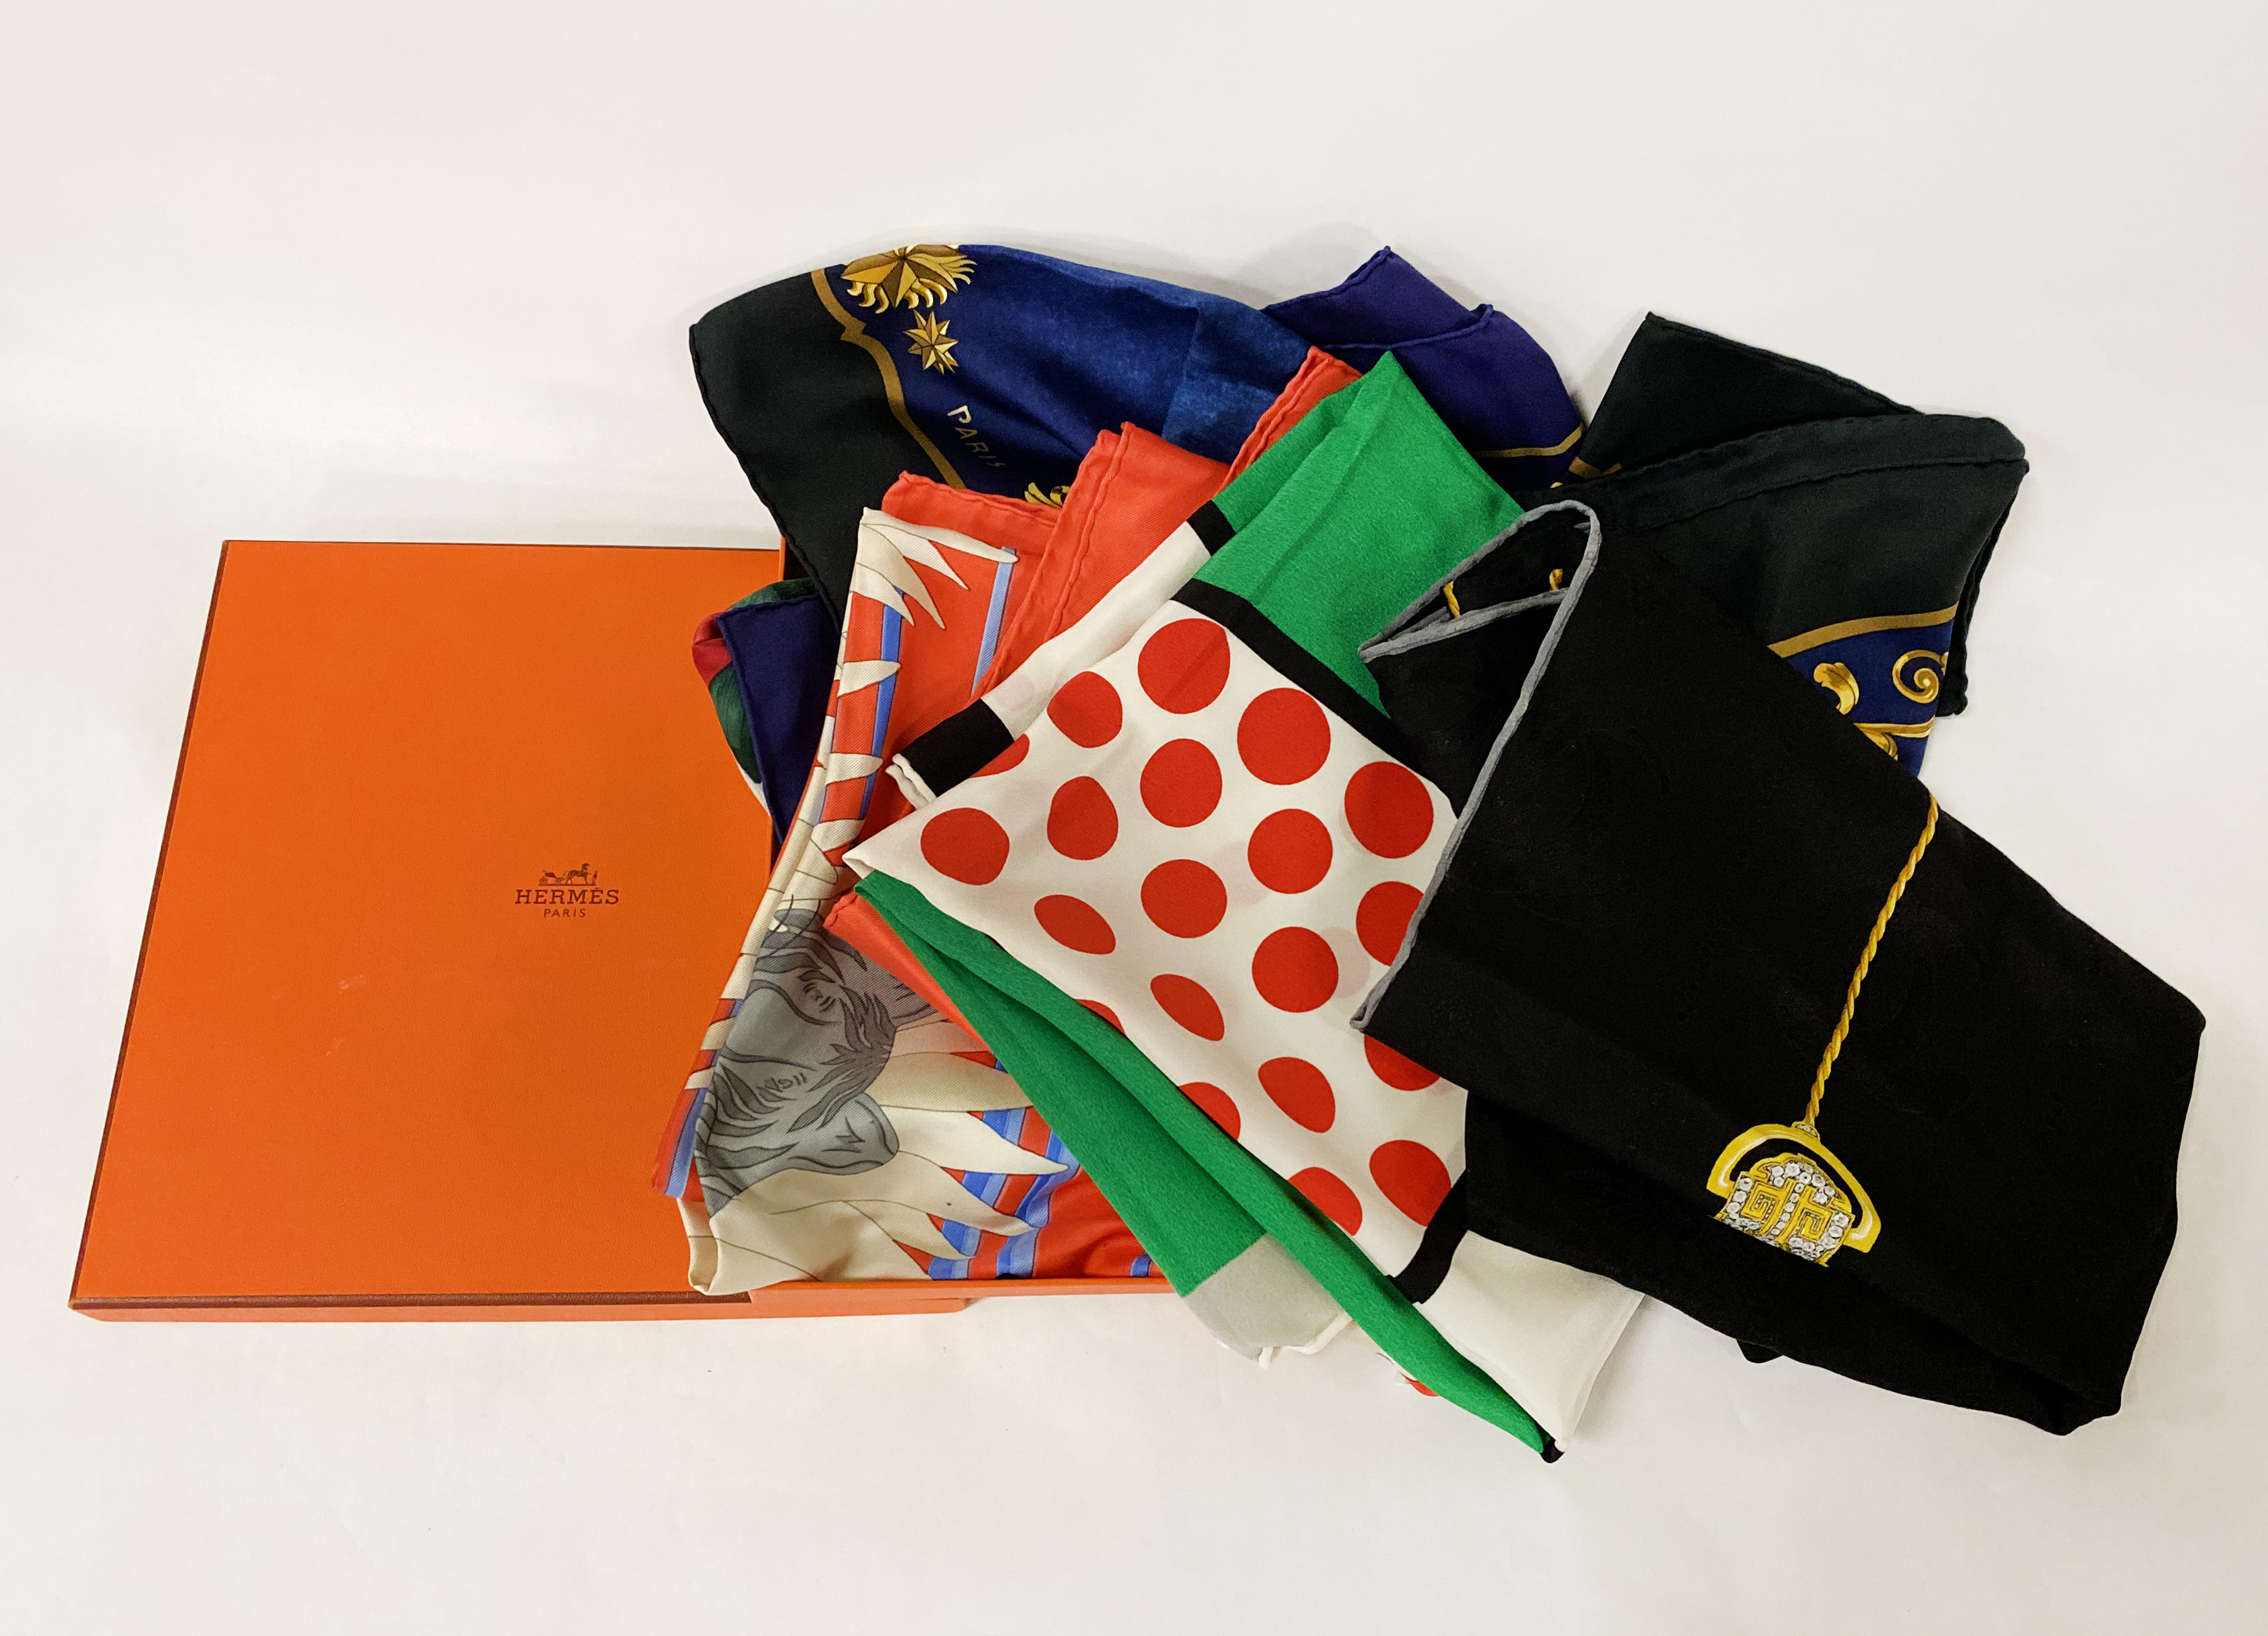 FOUR HERMES SCARVES , 1 MUST DE CARTIER & 1 RODIER SCARF - 6 IN TOTAL